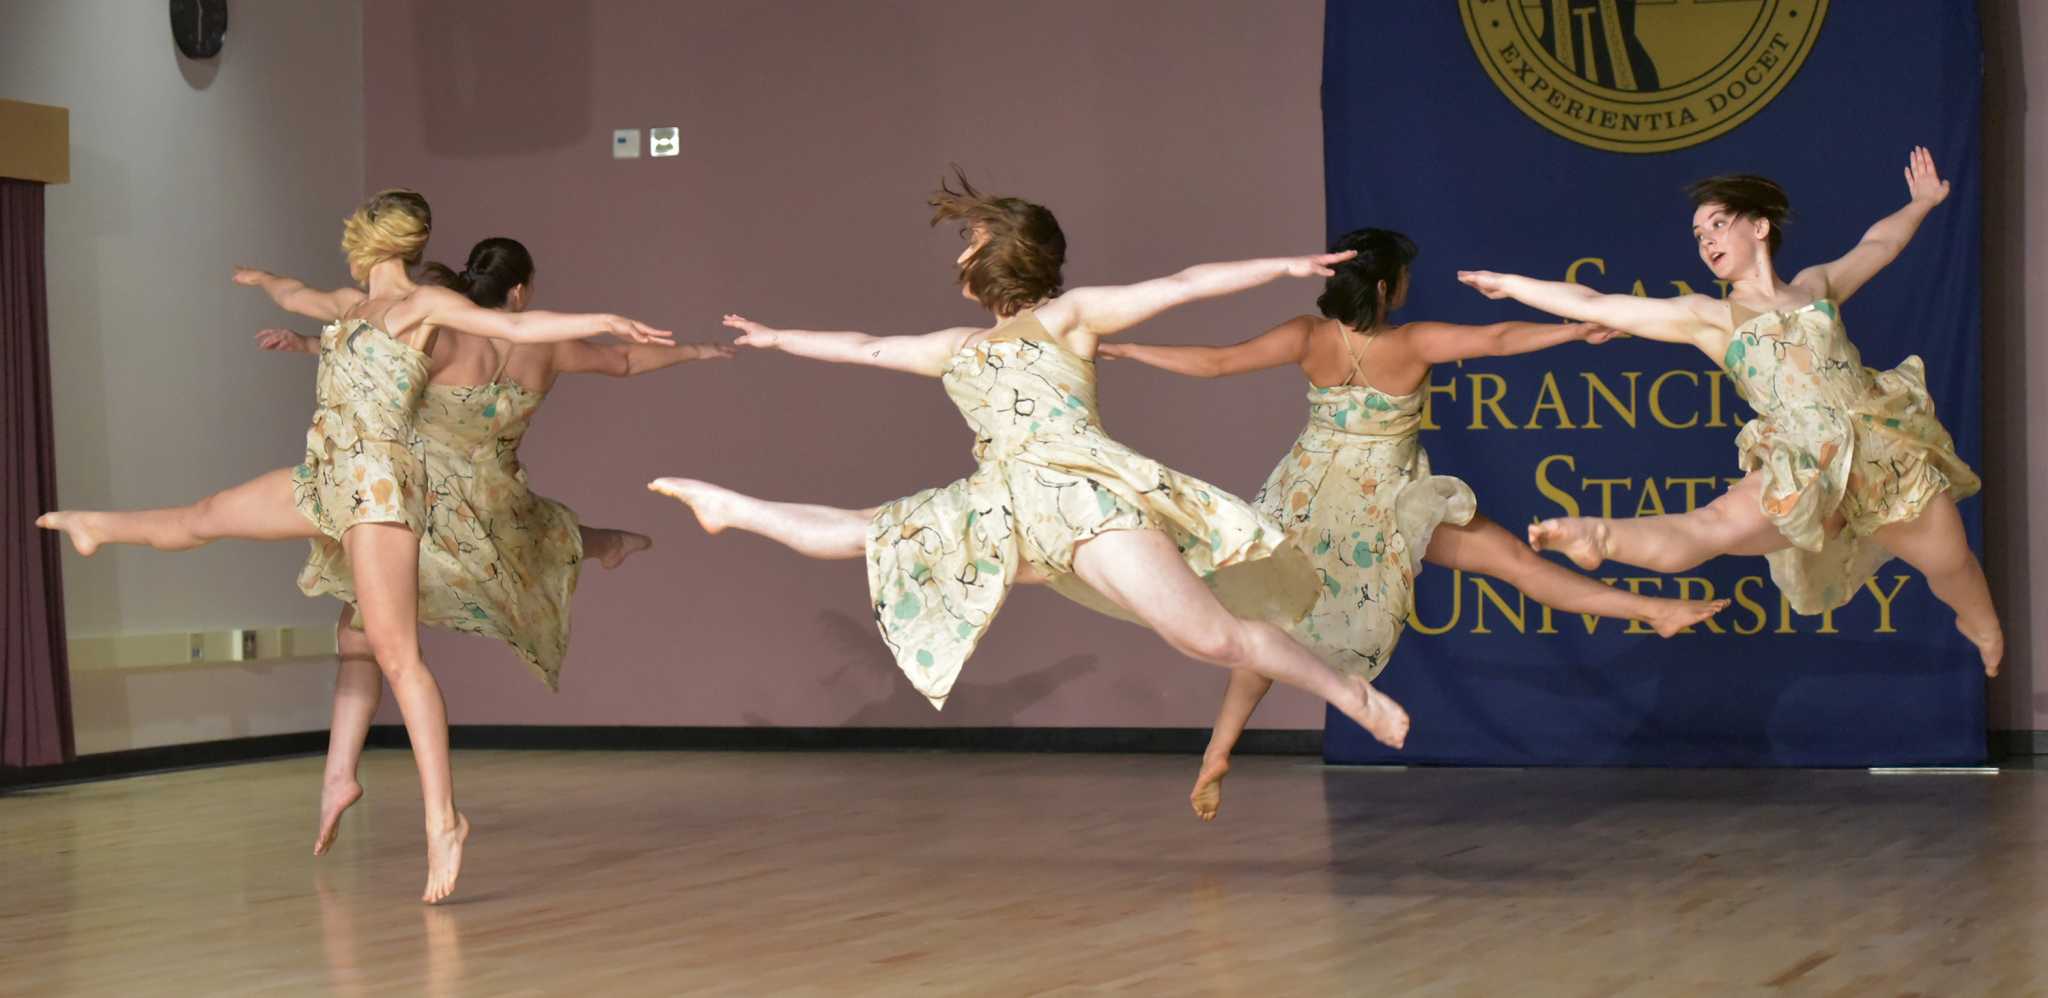  Student dancers perform during creative arts dance studio ribbon cutting ceremony at Creative Art Building in SF State Wednesday, March.2. (Qing Huang/Xpress)